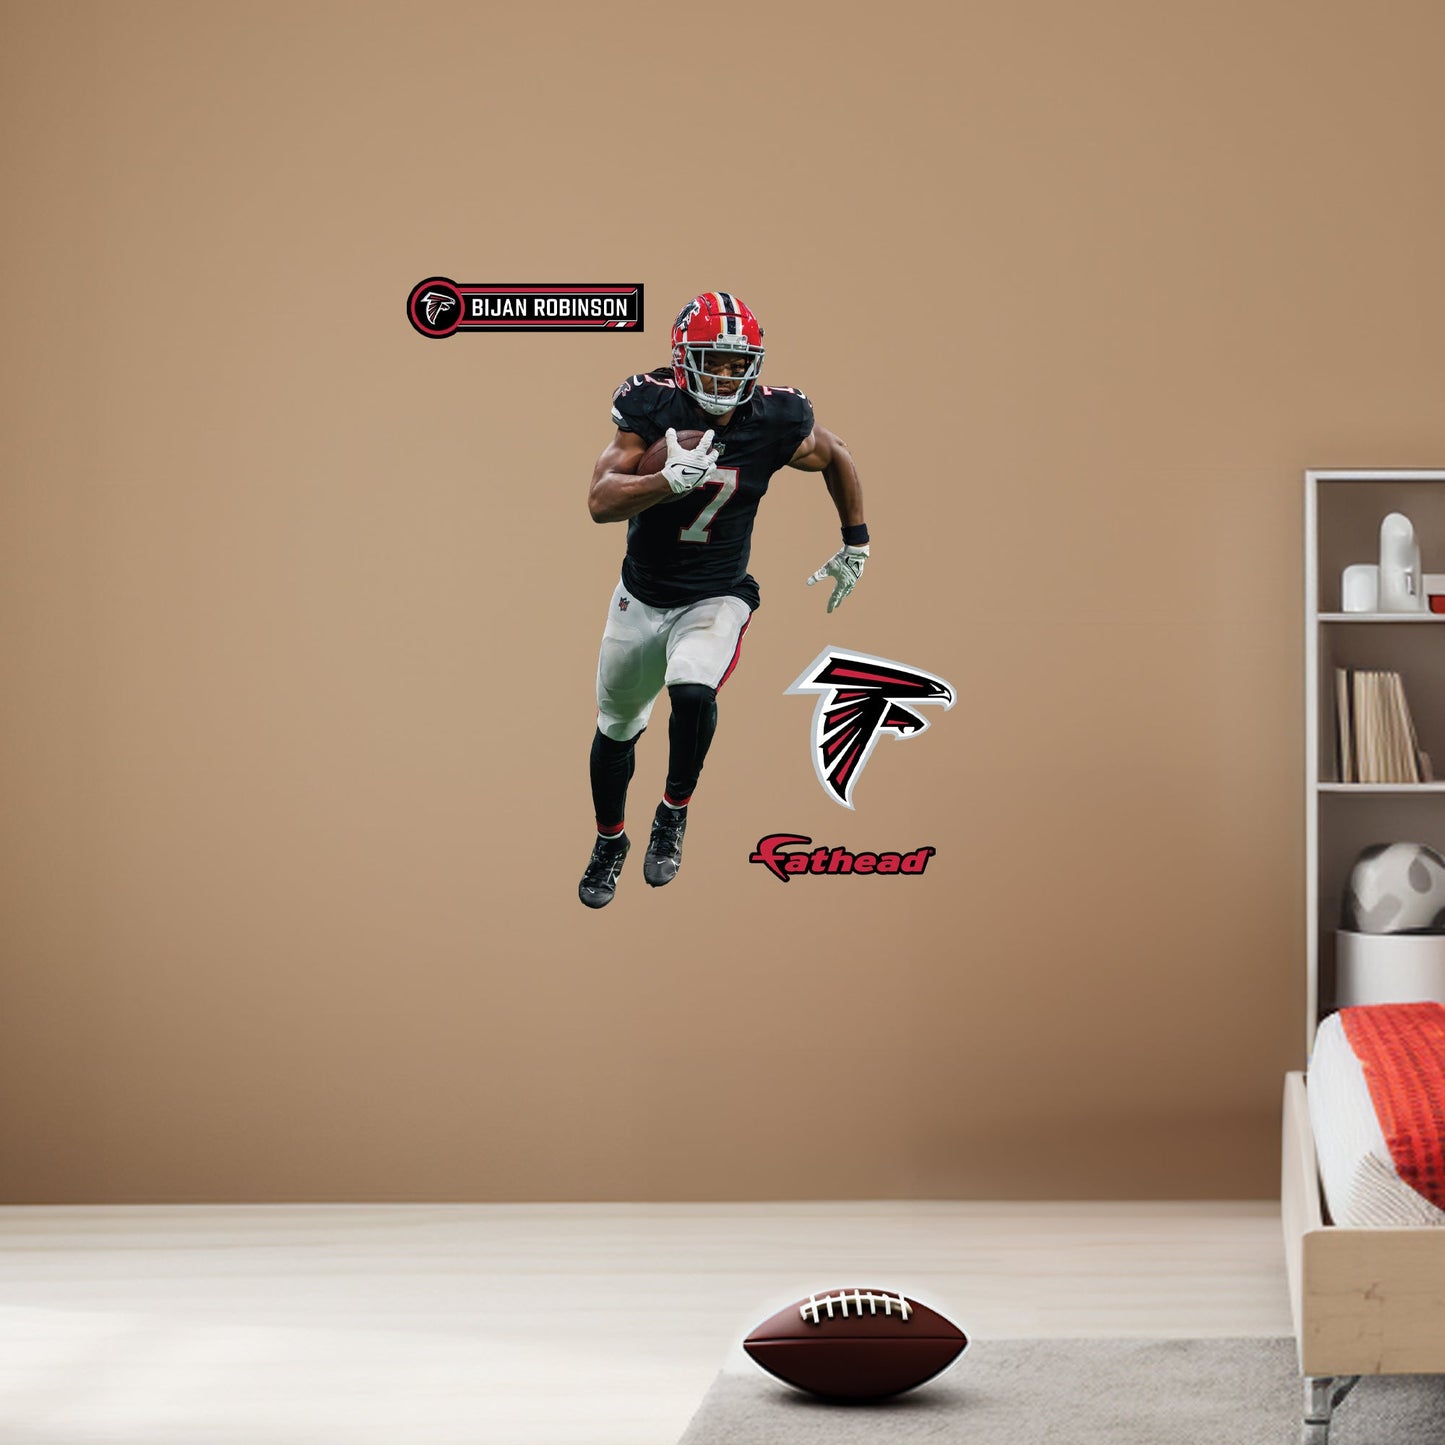 Atlanta Falcons: Bijan Robinson Throwback        - Officially Licensed NFL Removable     Adhesive Decal